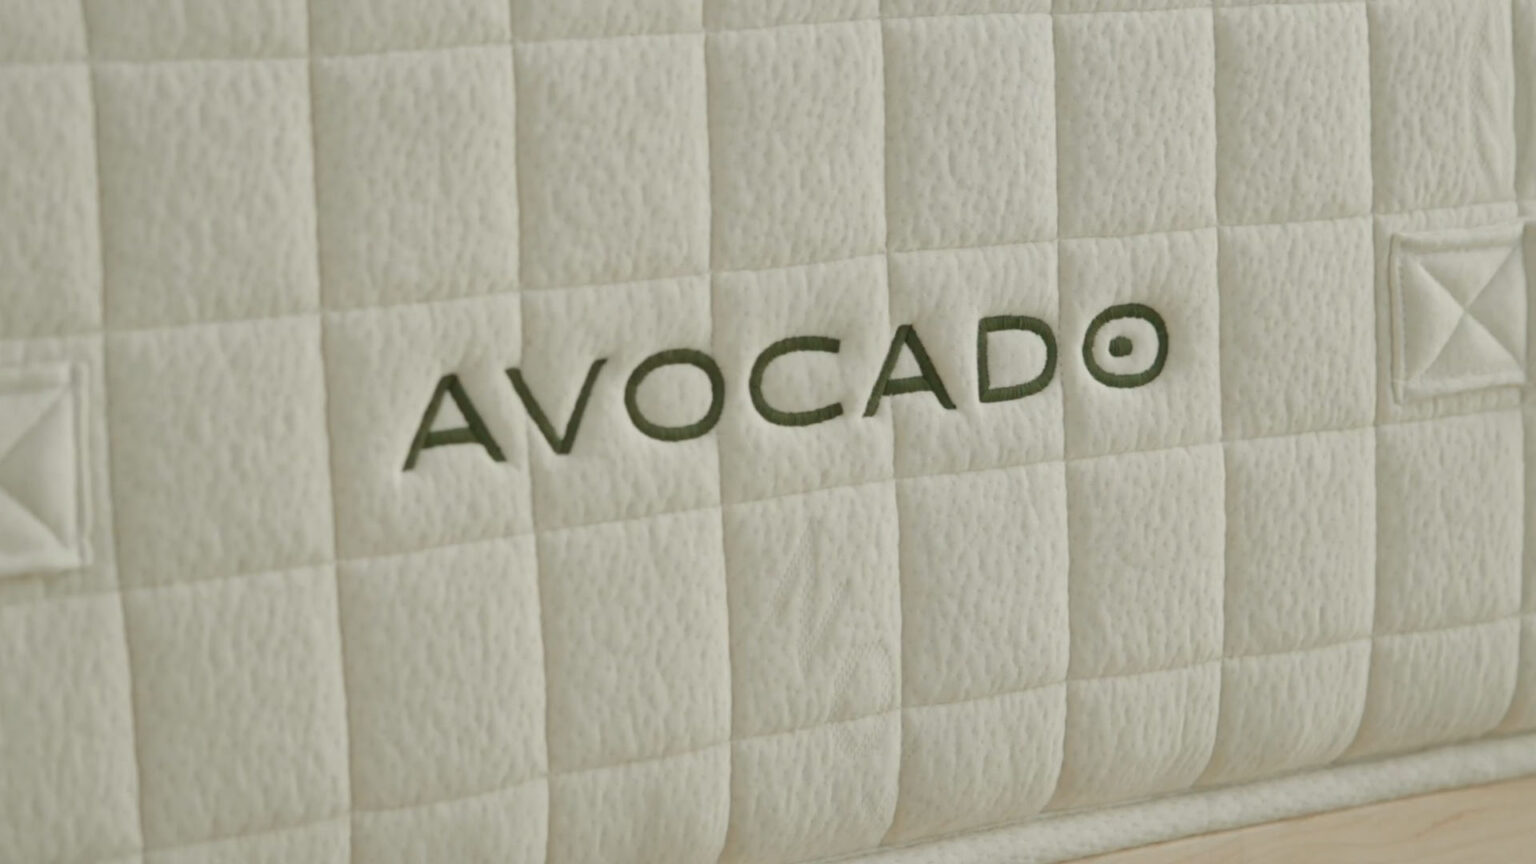 Avocado Mattress delivers to Toms River